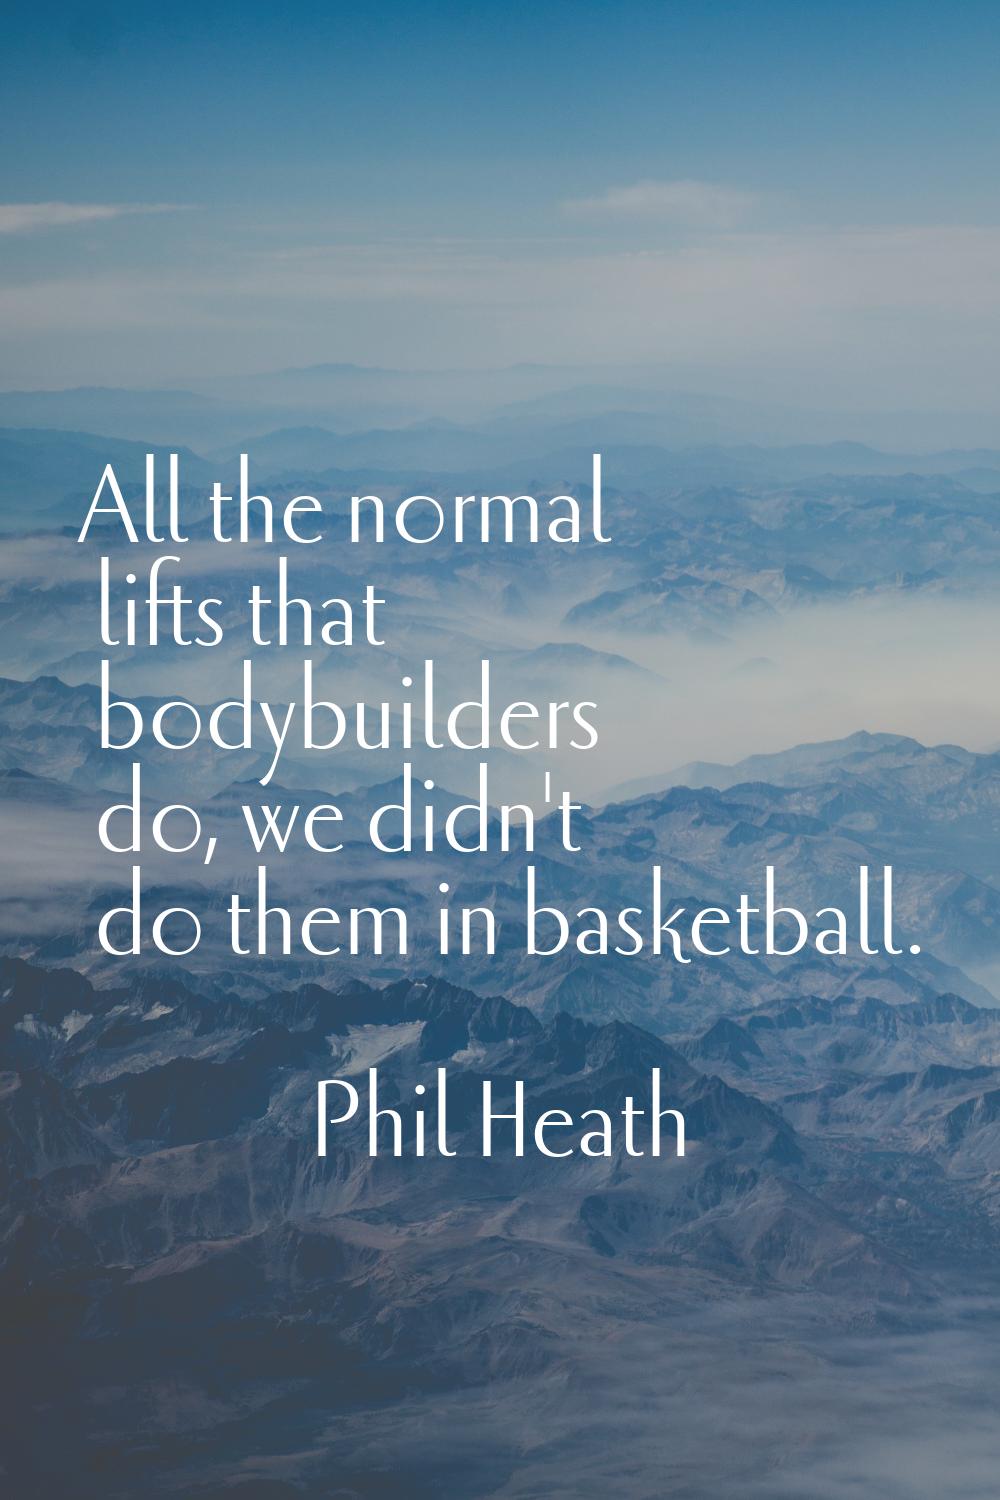 All the normal lifts that bodybuilders do, we didn't do them in basketball.